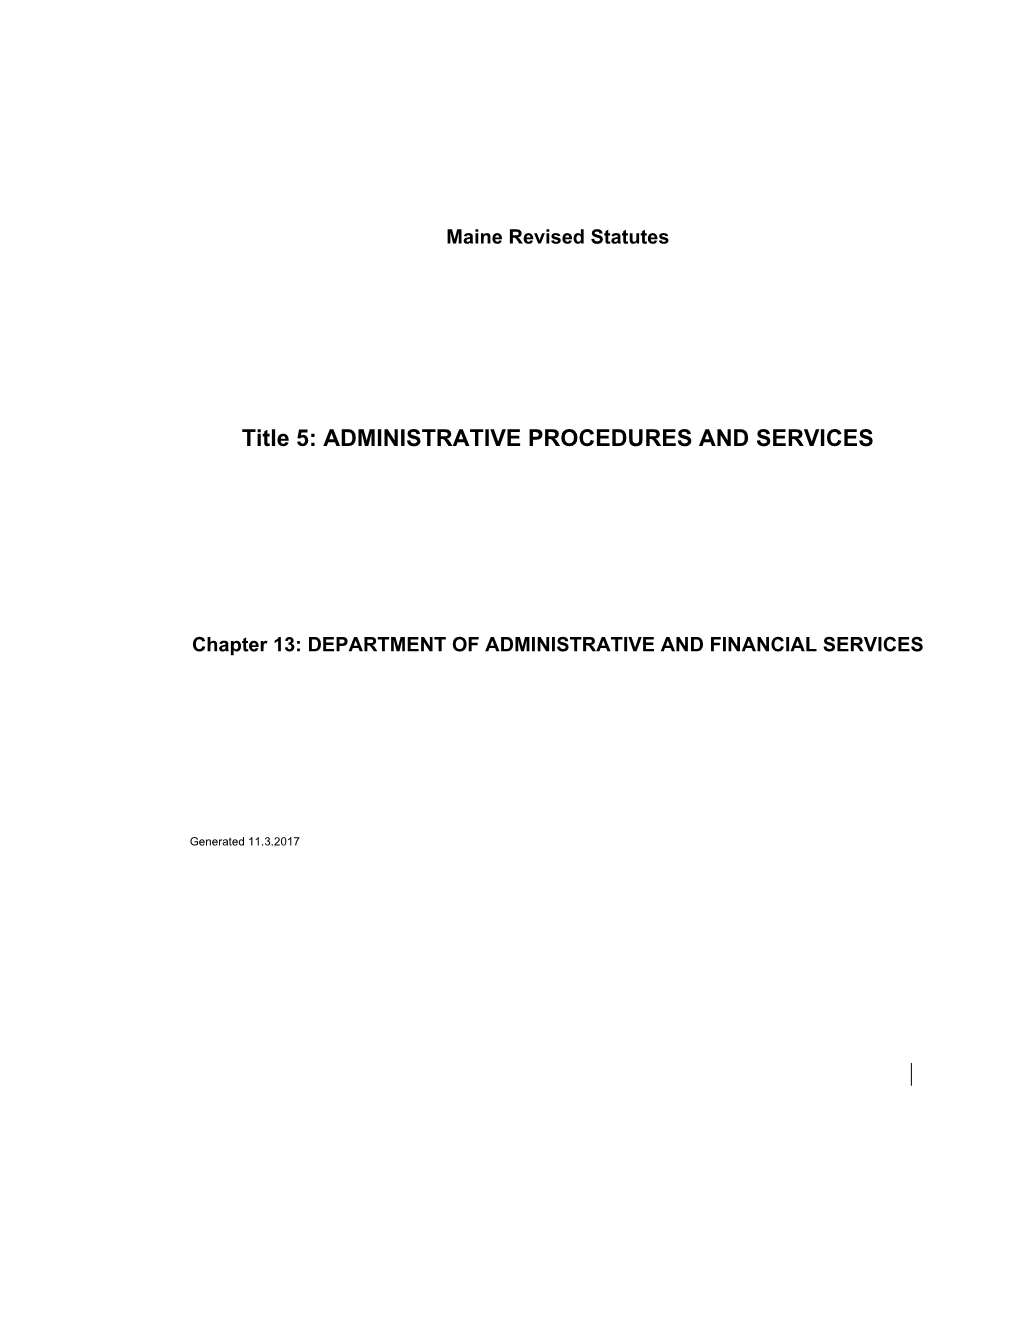 Title 5: ADMINISTRATIVE PROCEDURES and SERVICES